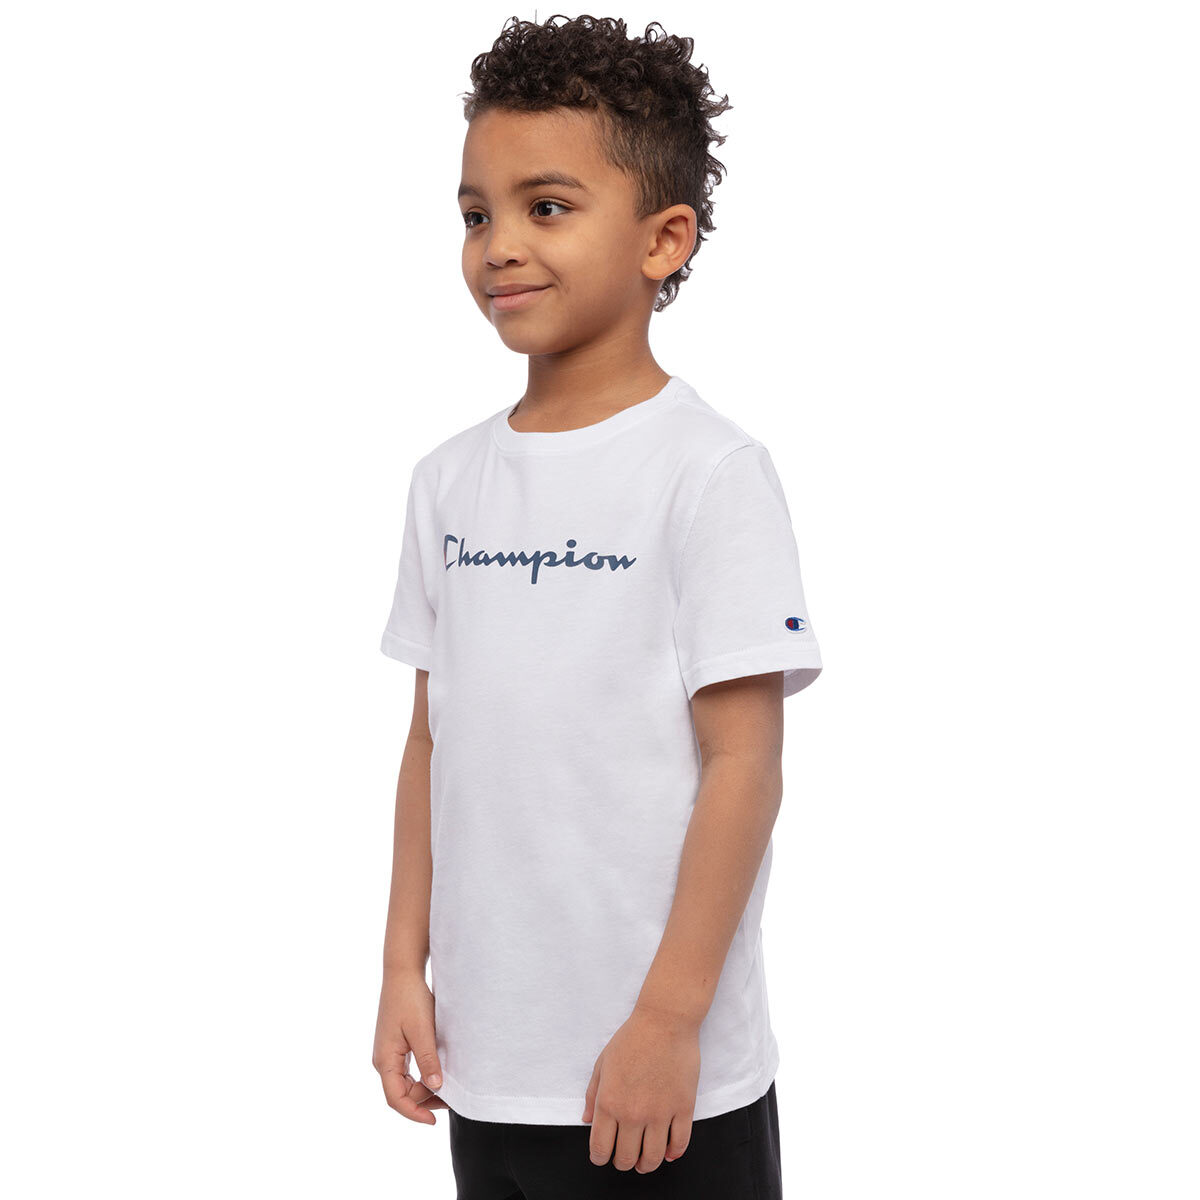 Champion Boy's 2 Pack Short Sleeve T-shirt in White/Shield Blue